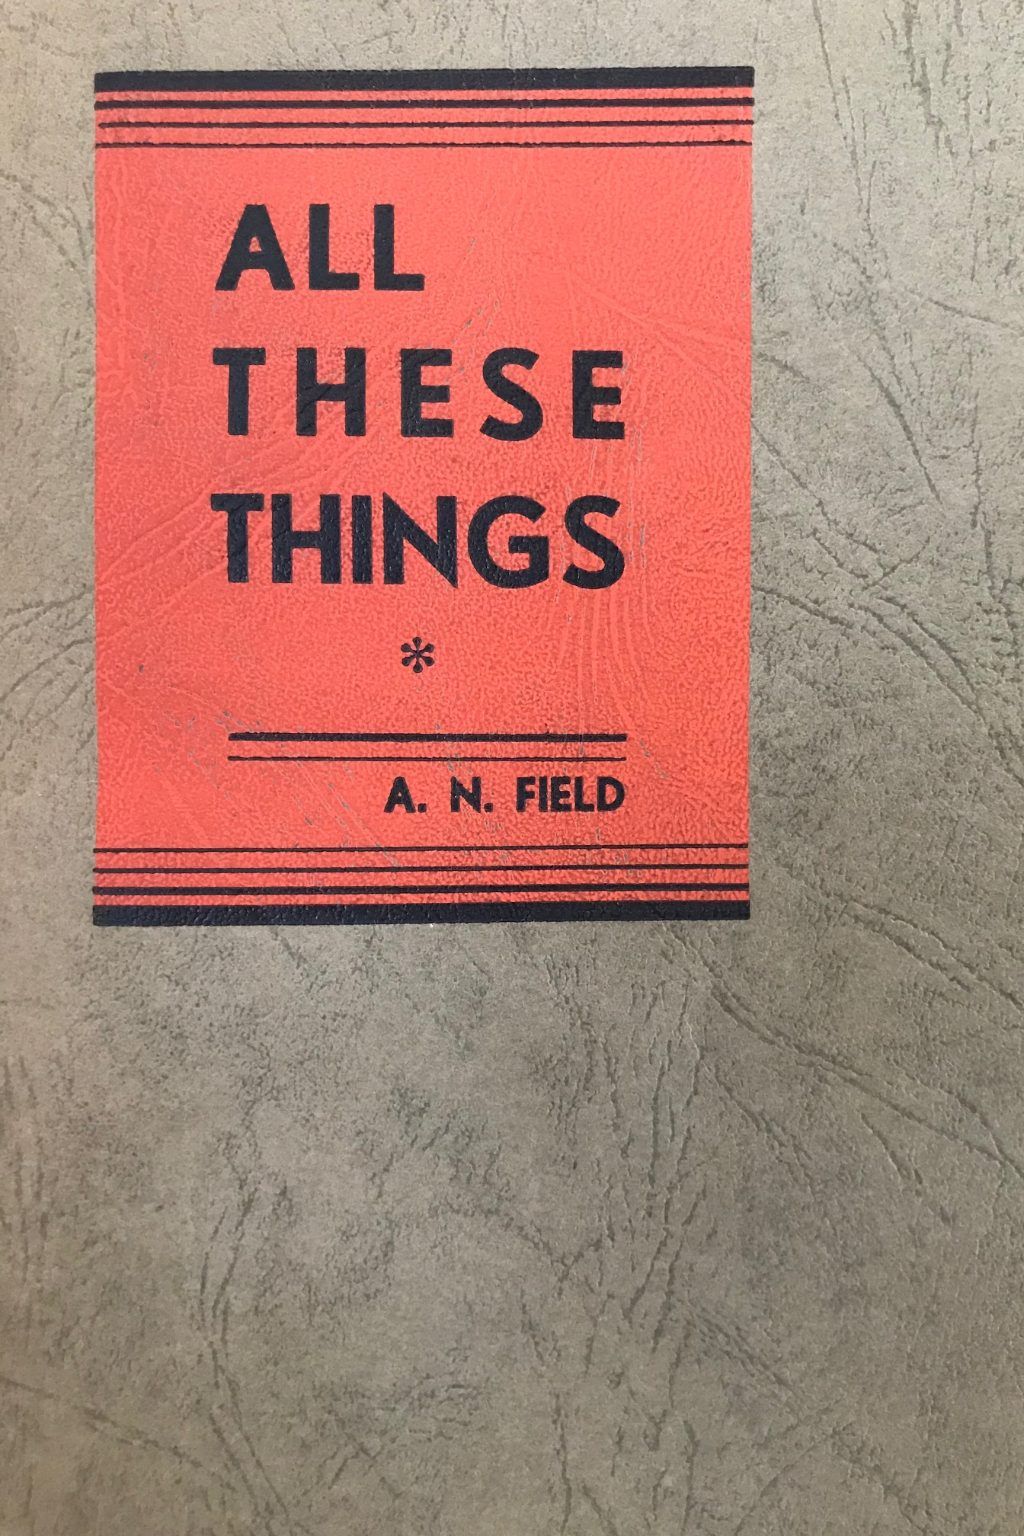 ALL THESE THINGS: Volume 1